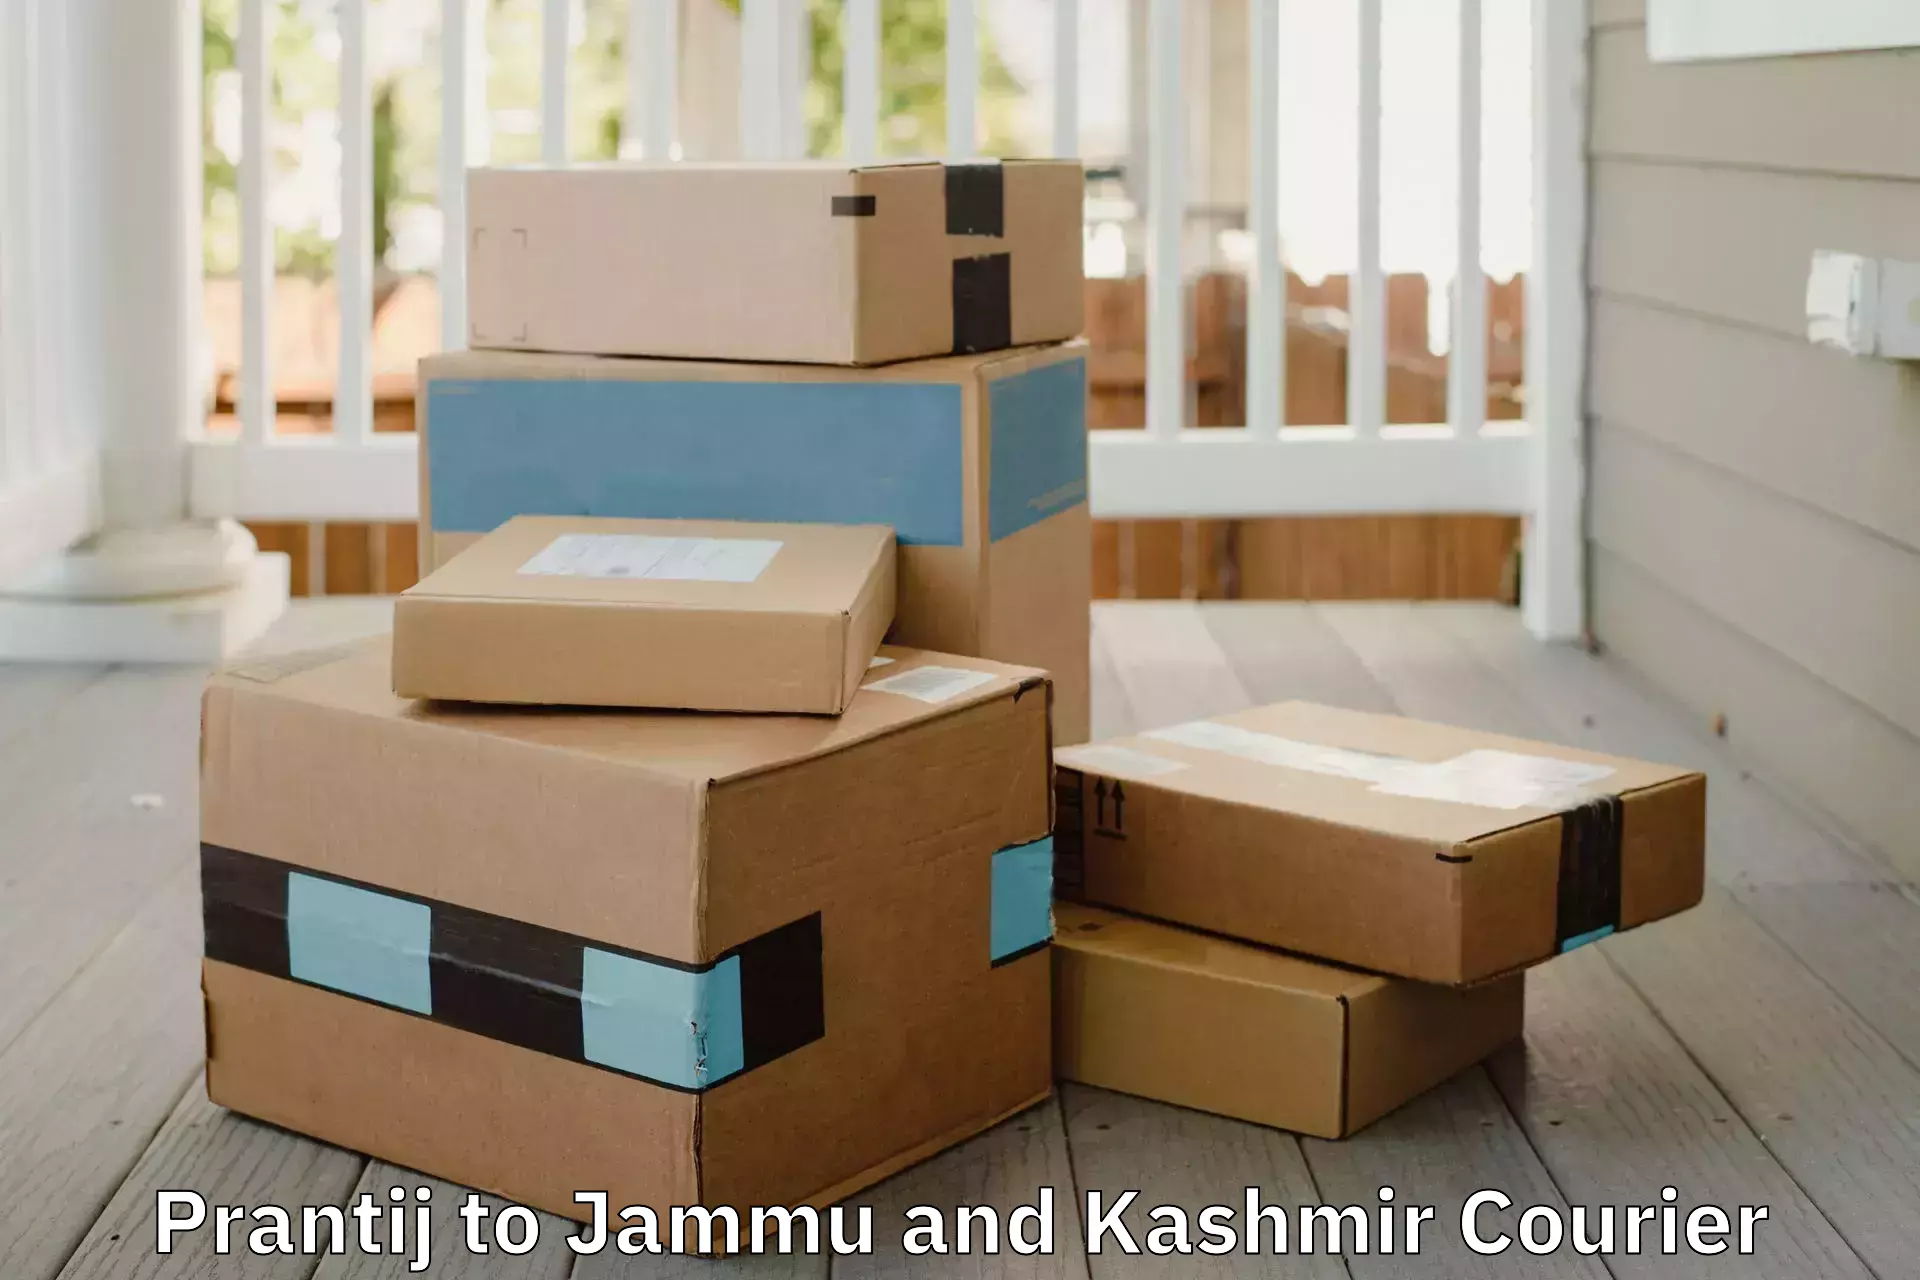 Full-service relocation in Prantij to Jammu and Kashmir